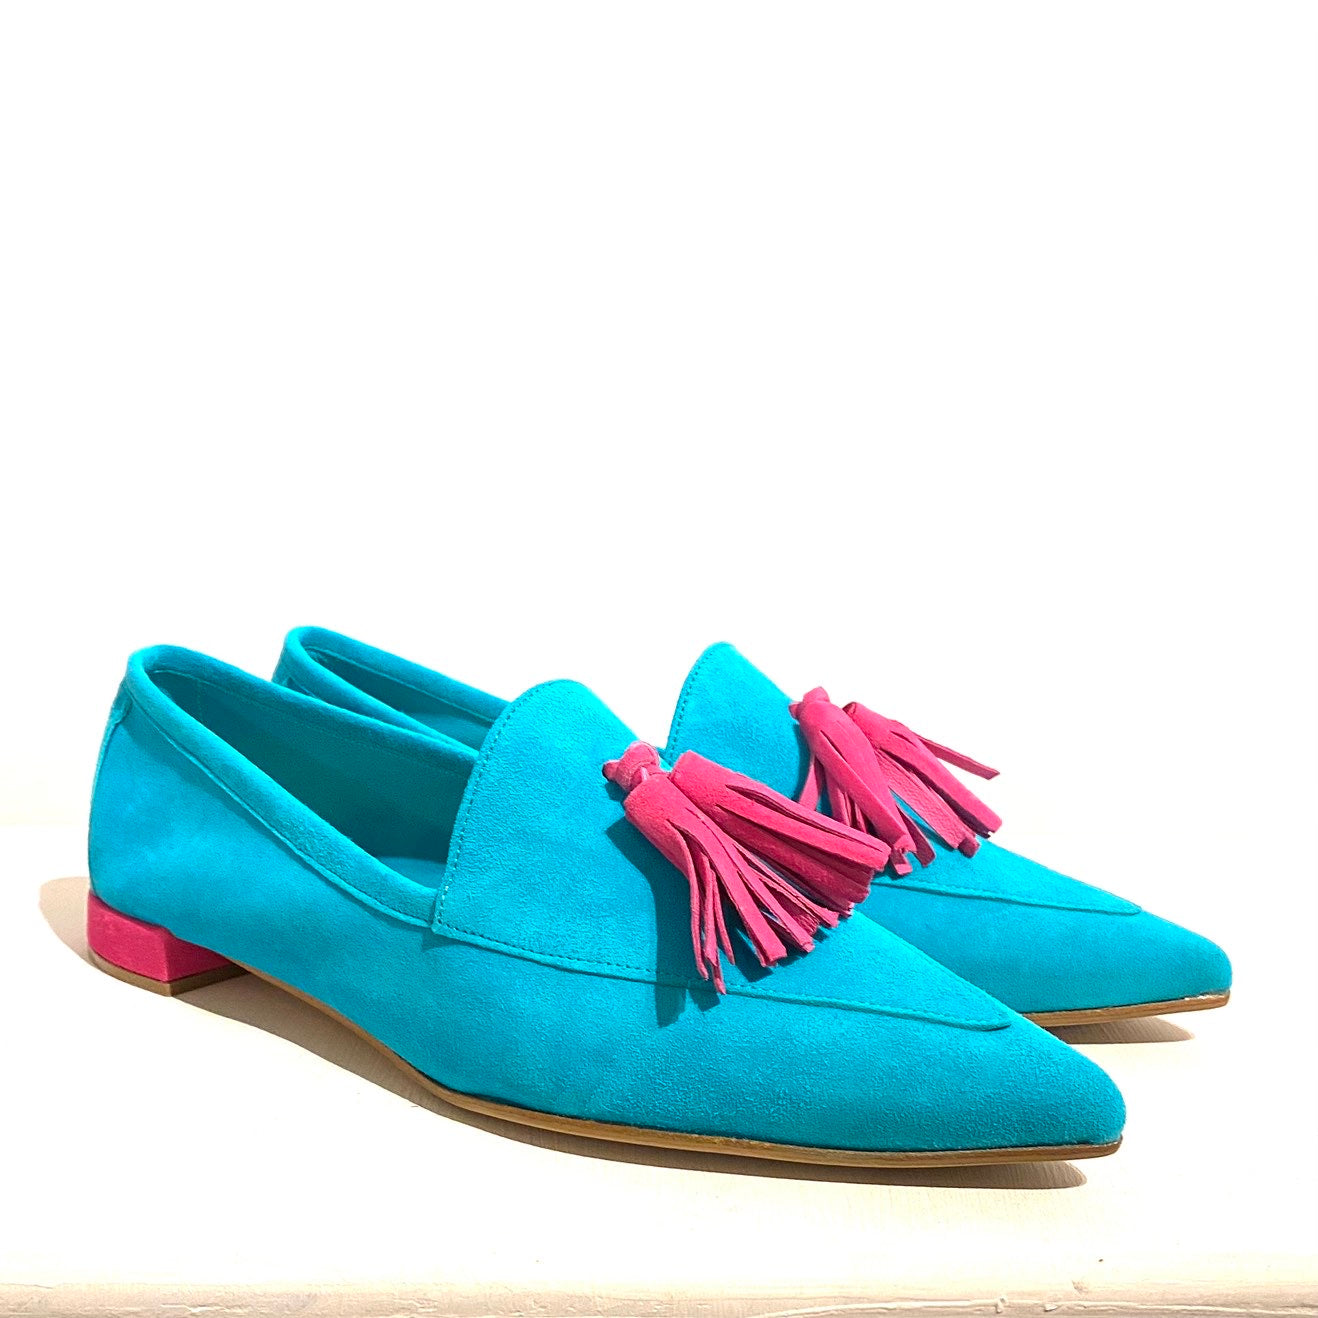 Turquoise moccasin